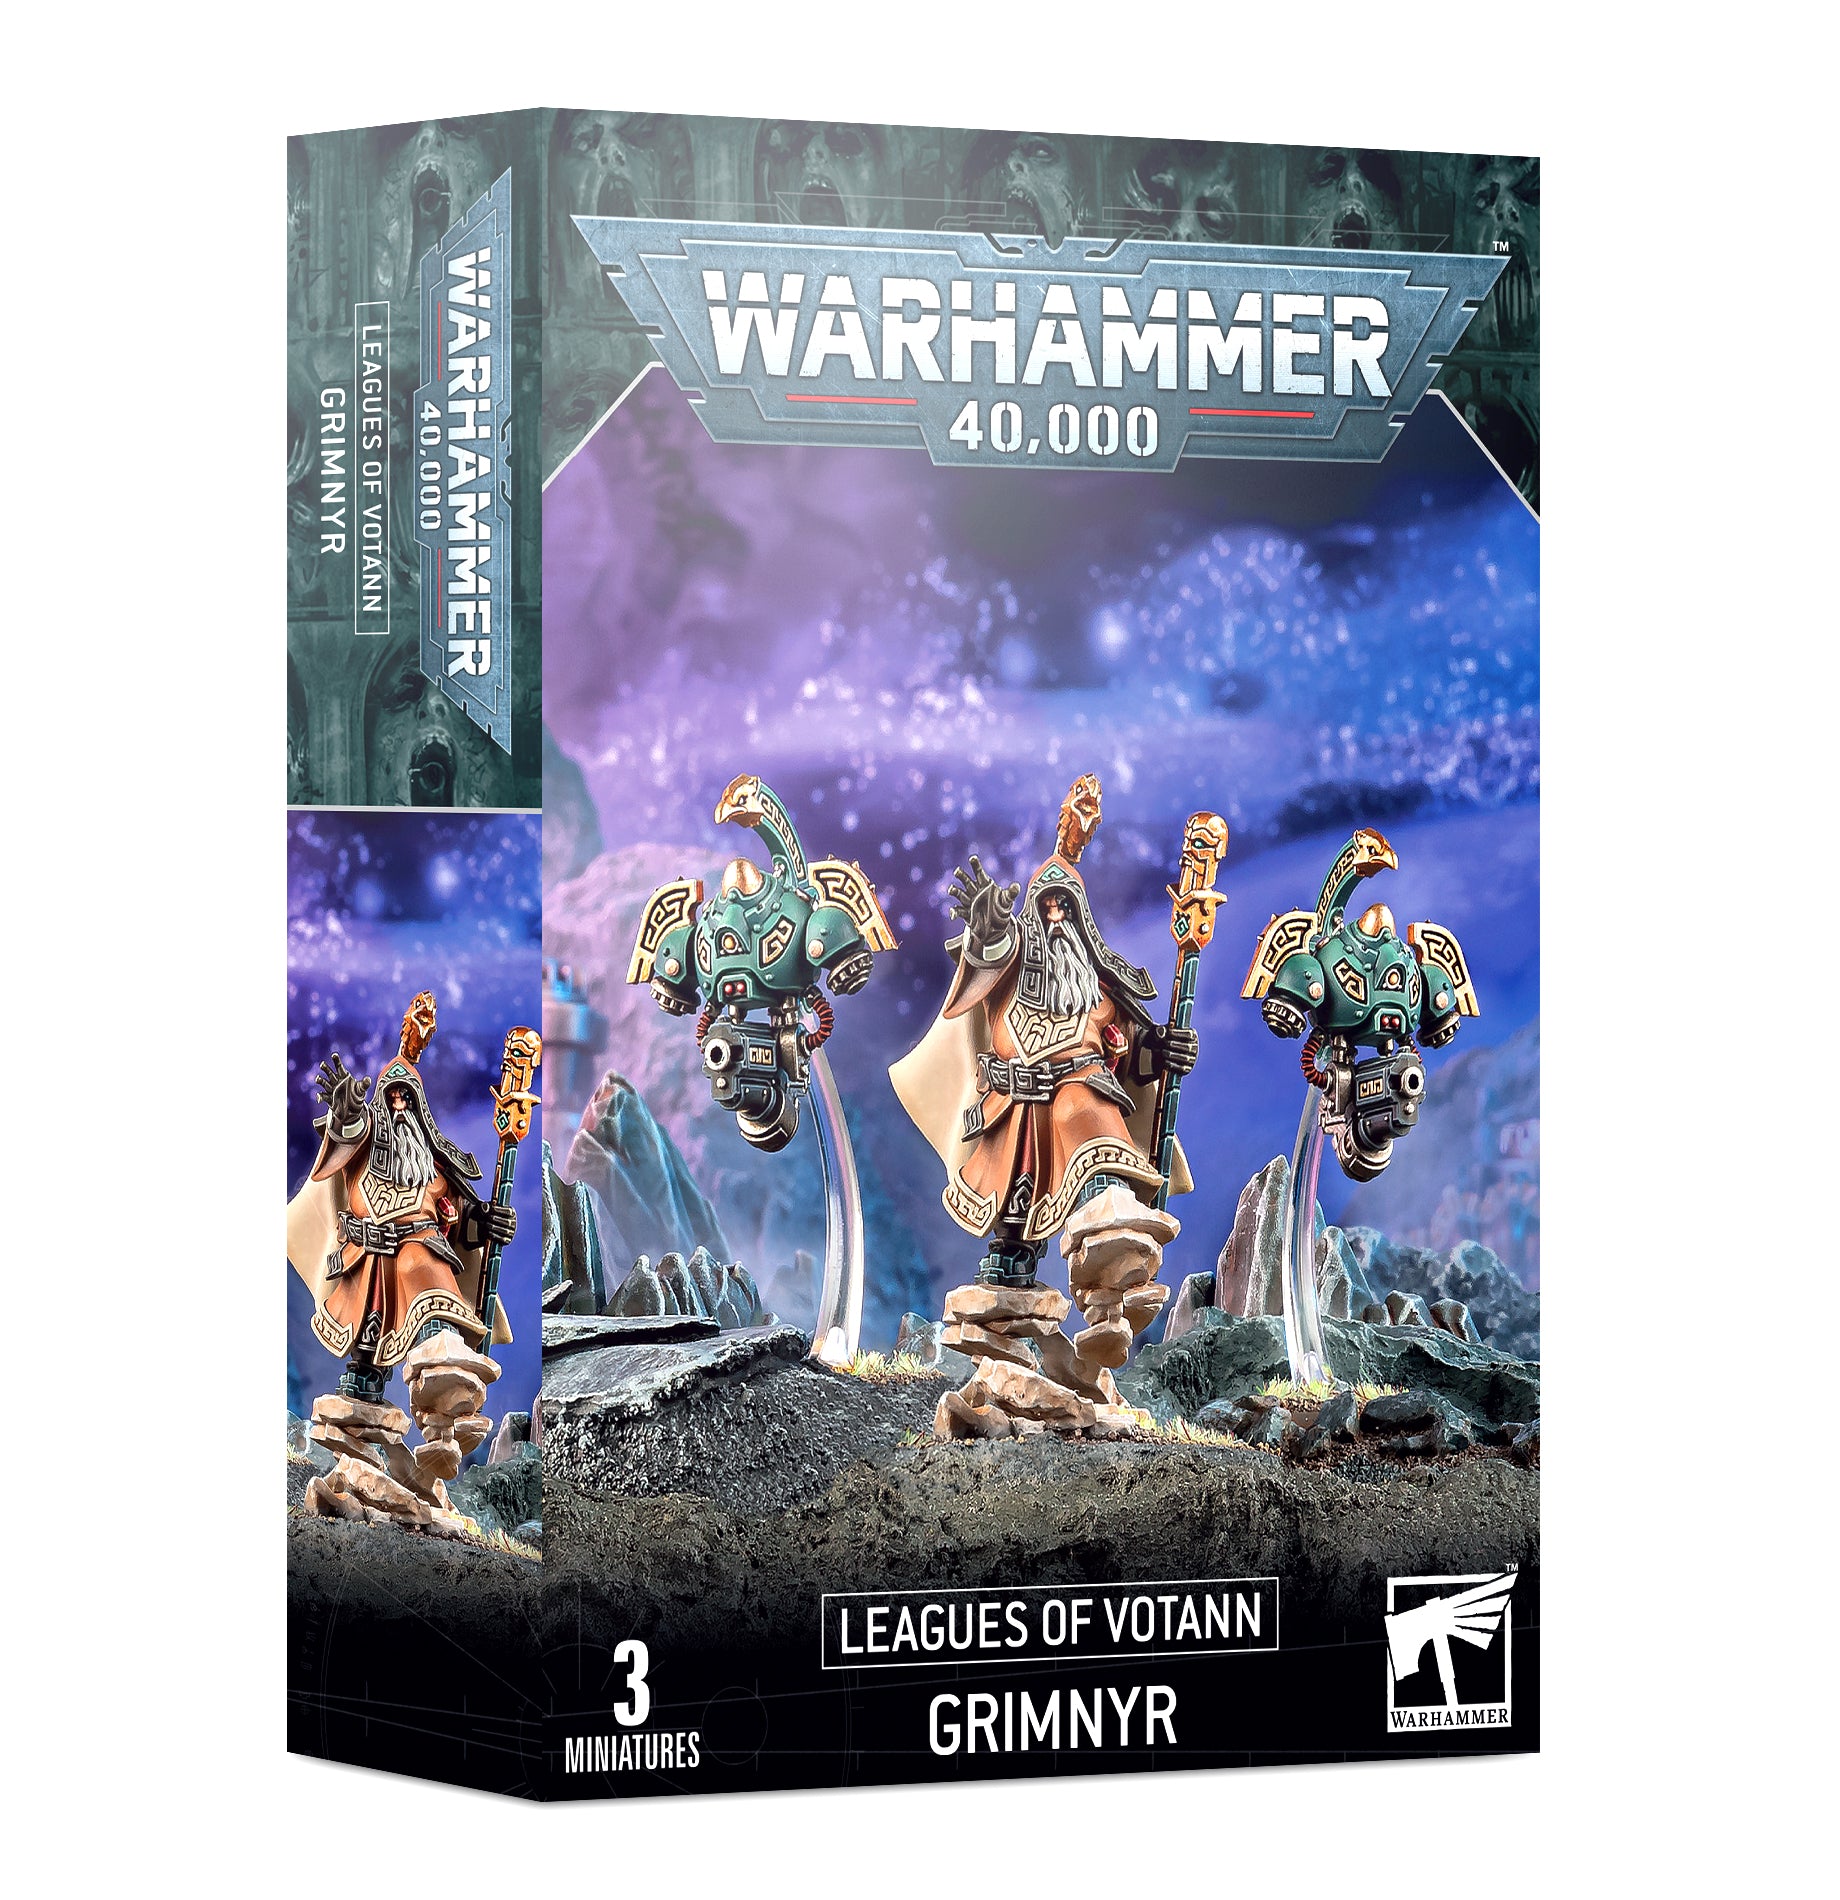 LEAGUES OF VOTANN: GRIMNYR Horus Heresy Games Workshop    | Red Claw Gaming